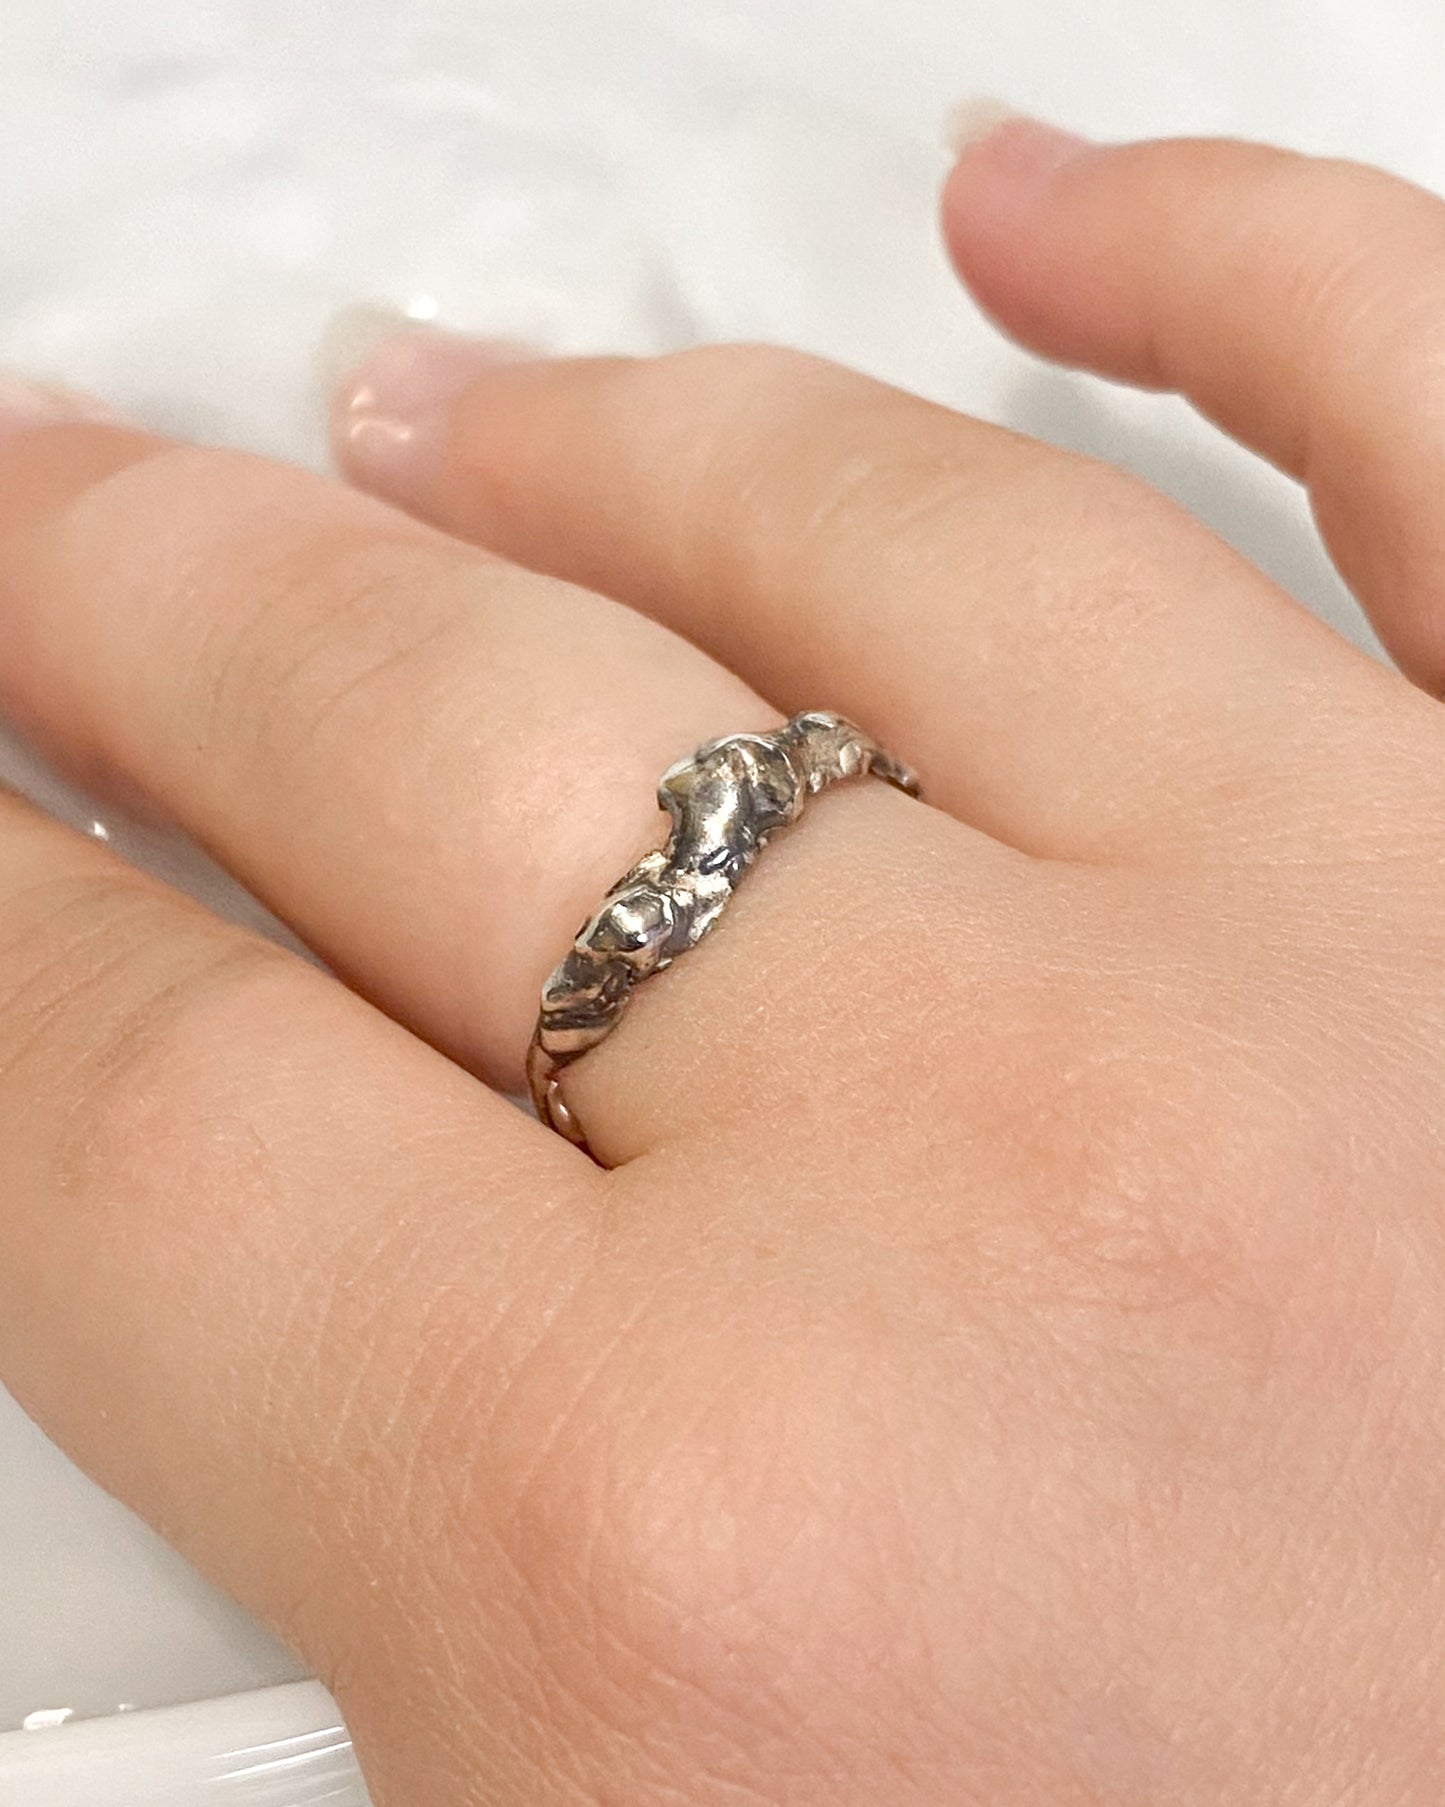 Molten silver ring on hand